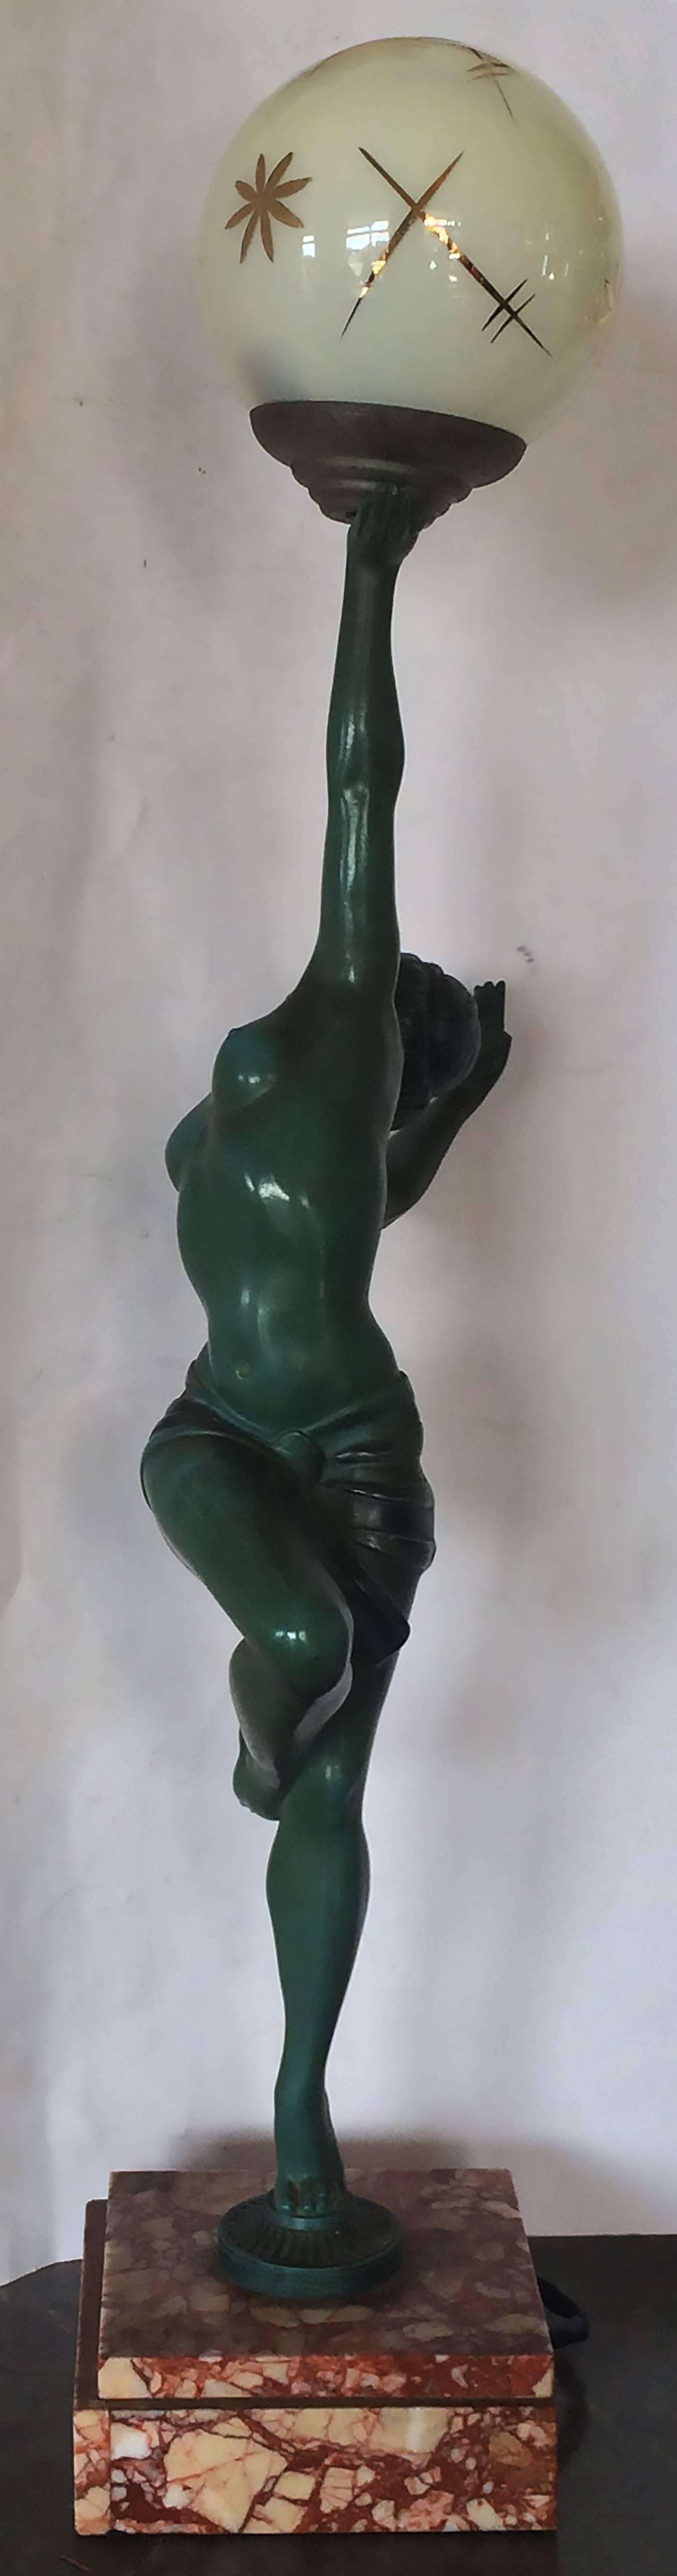 French Art Deco Nude Dancer Lamp by Molins-Balleste 4